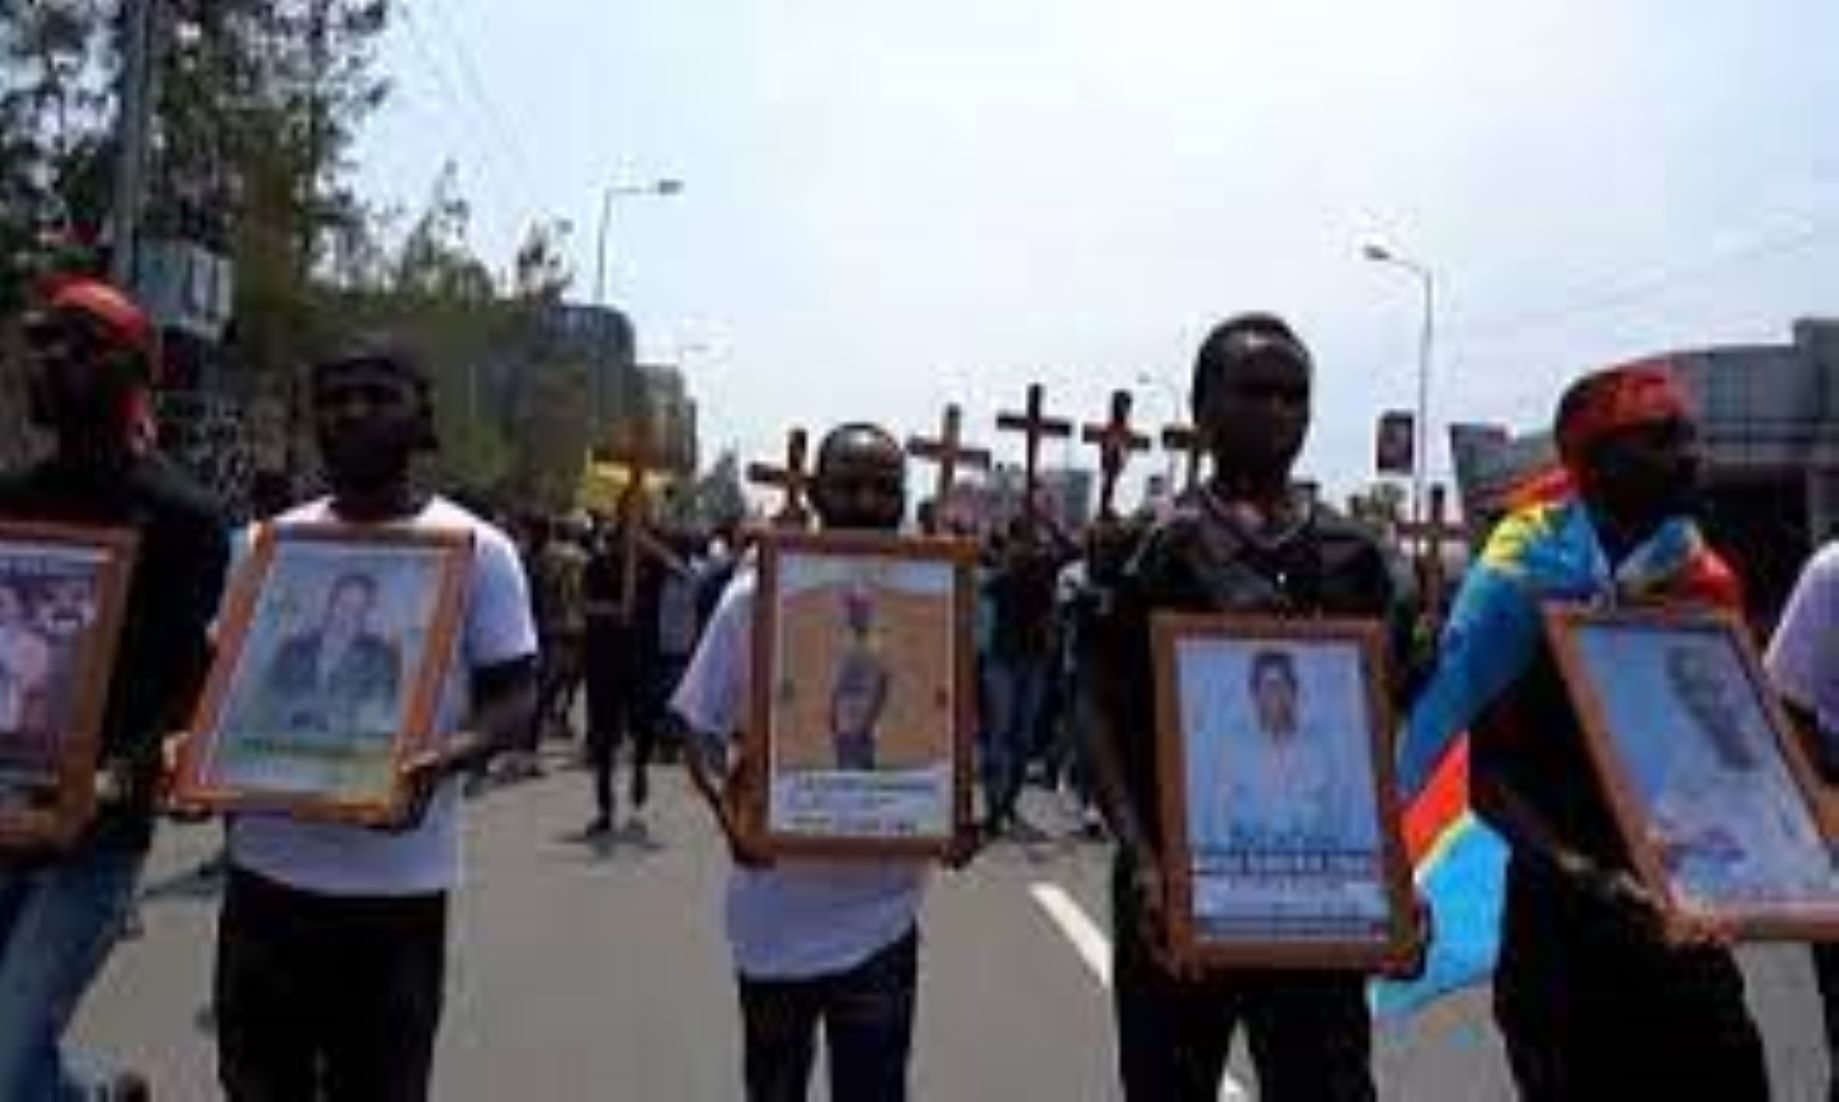 DR Congo Honours Victims Of Deadly Anti-UN Protests In Goma